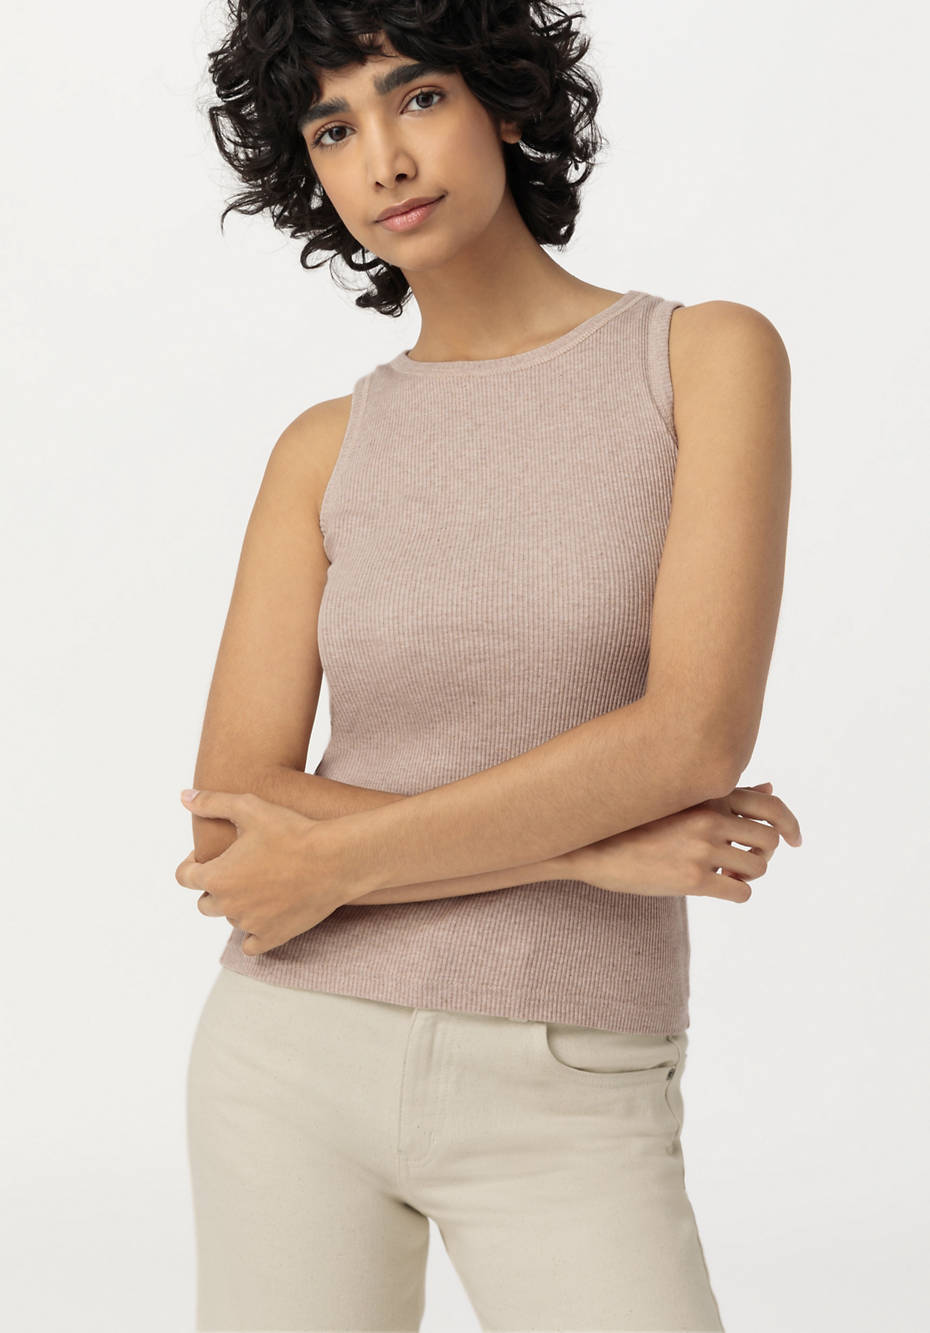 Top made from pure organic cotton